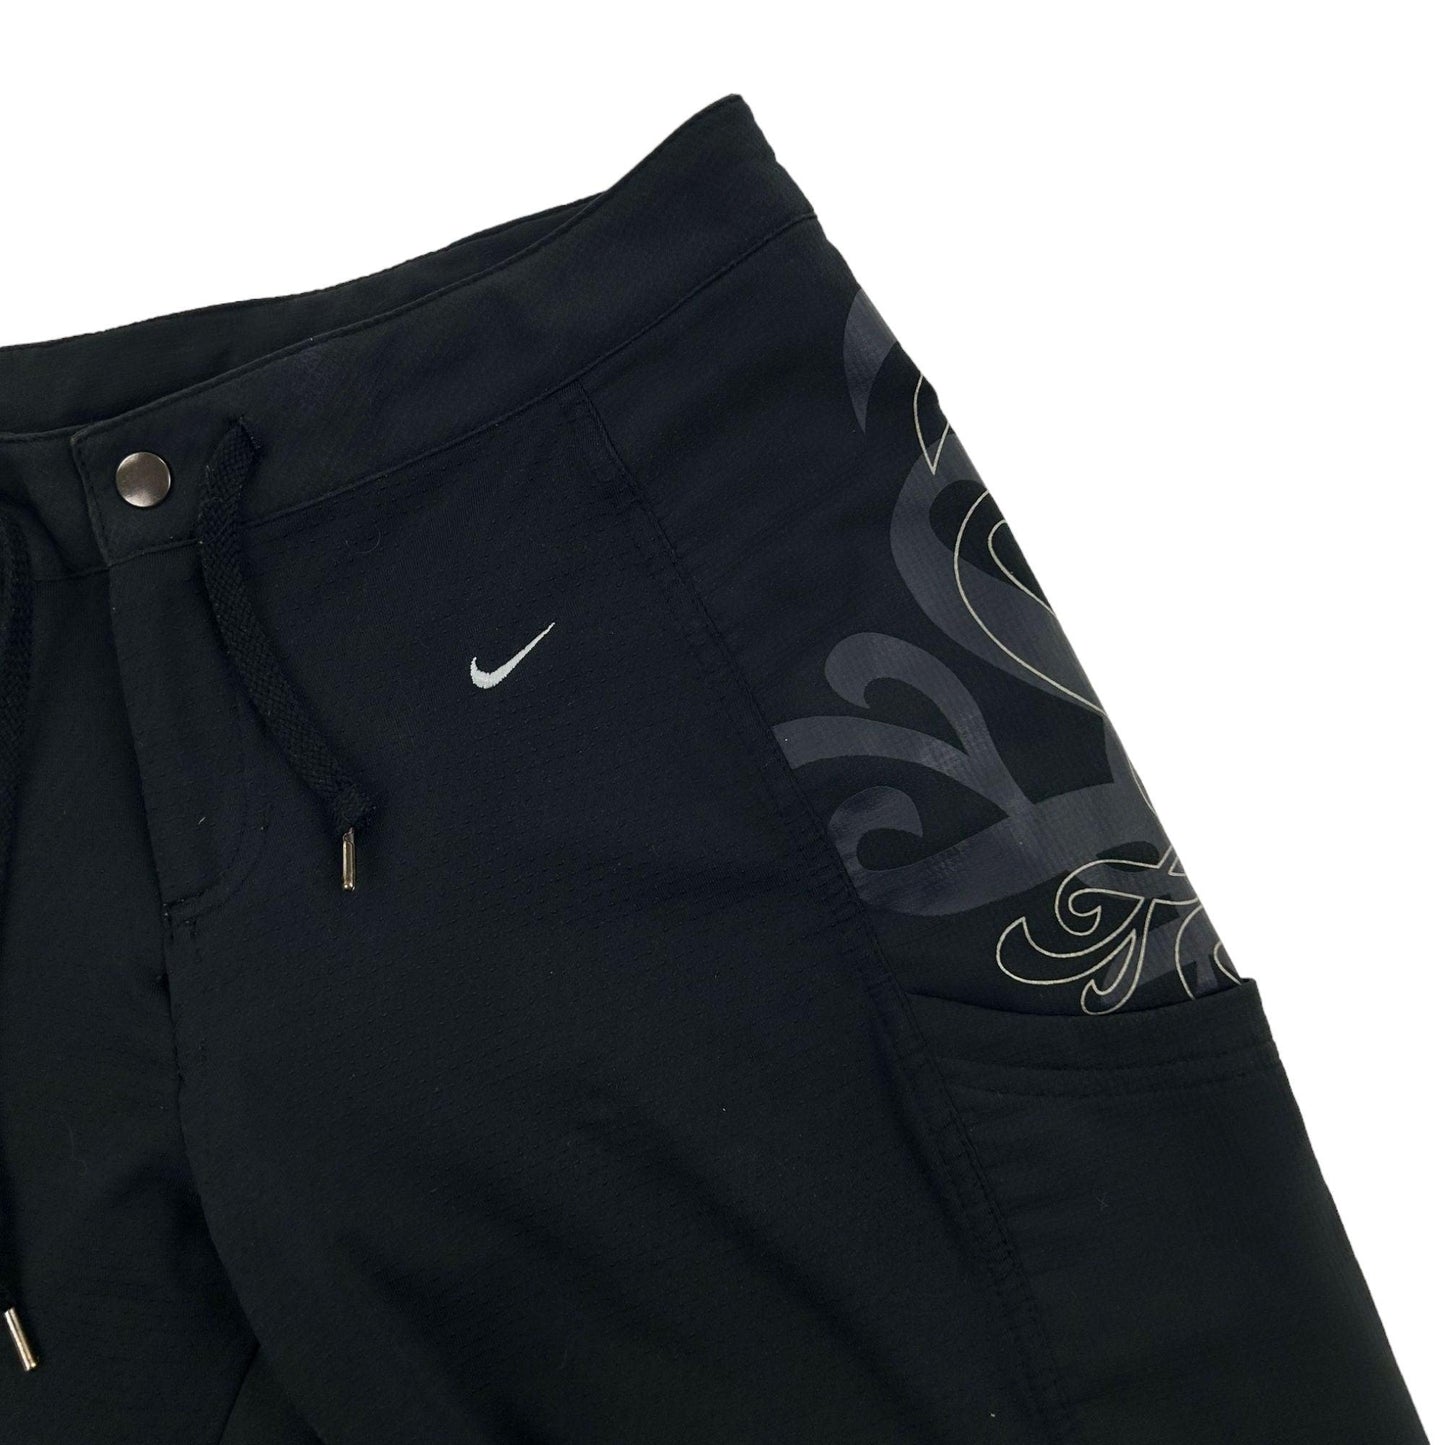 Vintage Nike Trousers Size W31 - Known Source